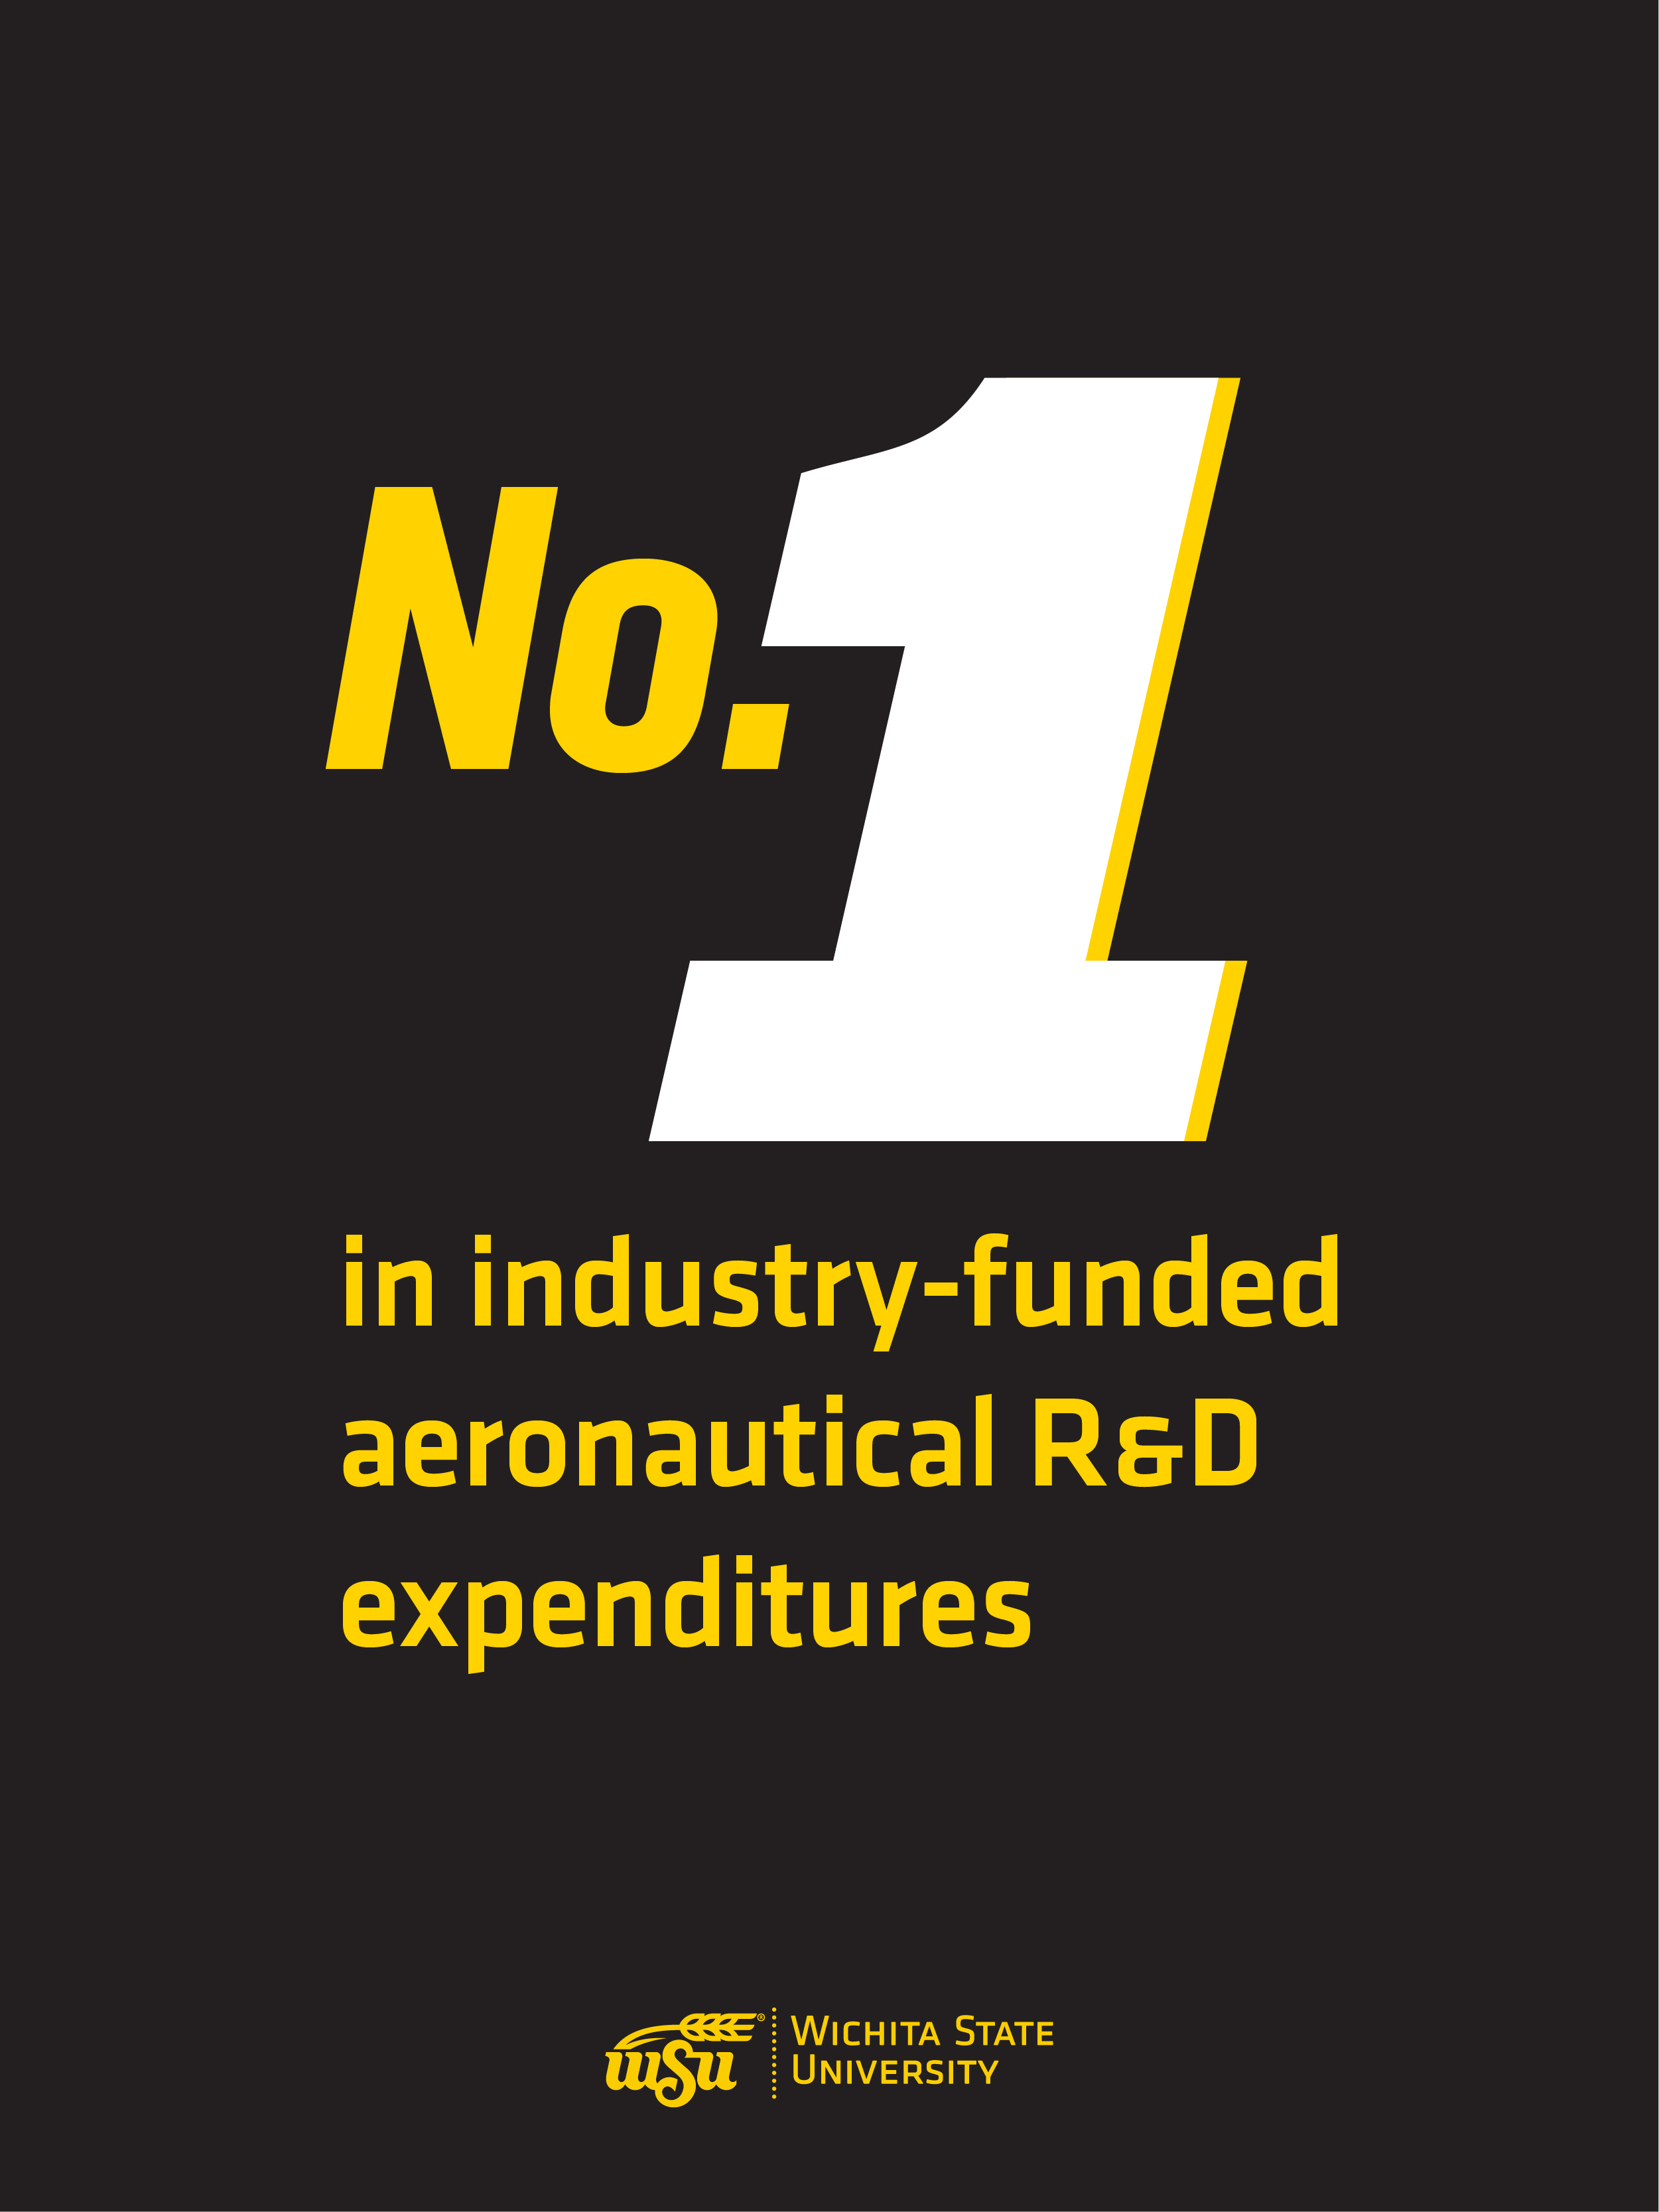 Infographic: No. 1 in industry-funded aeronautical engineering R&D expenditures